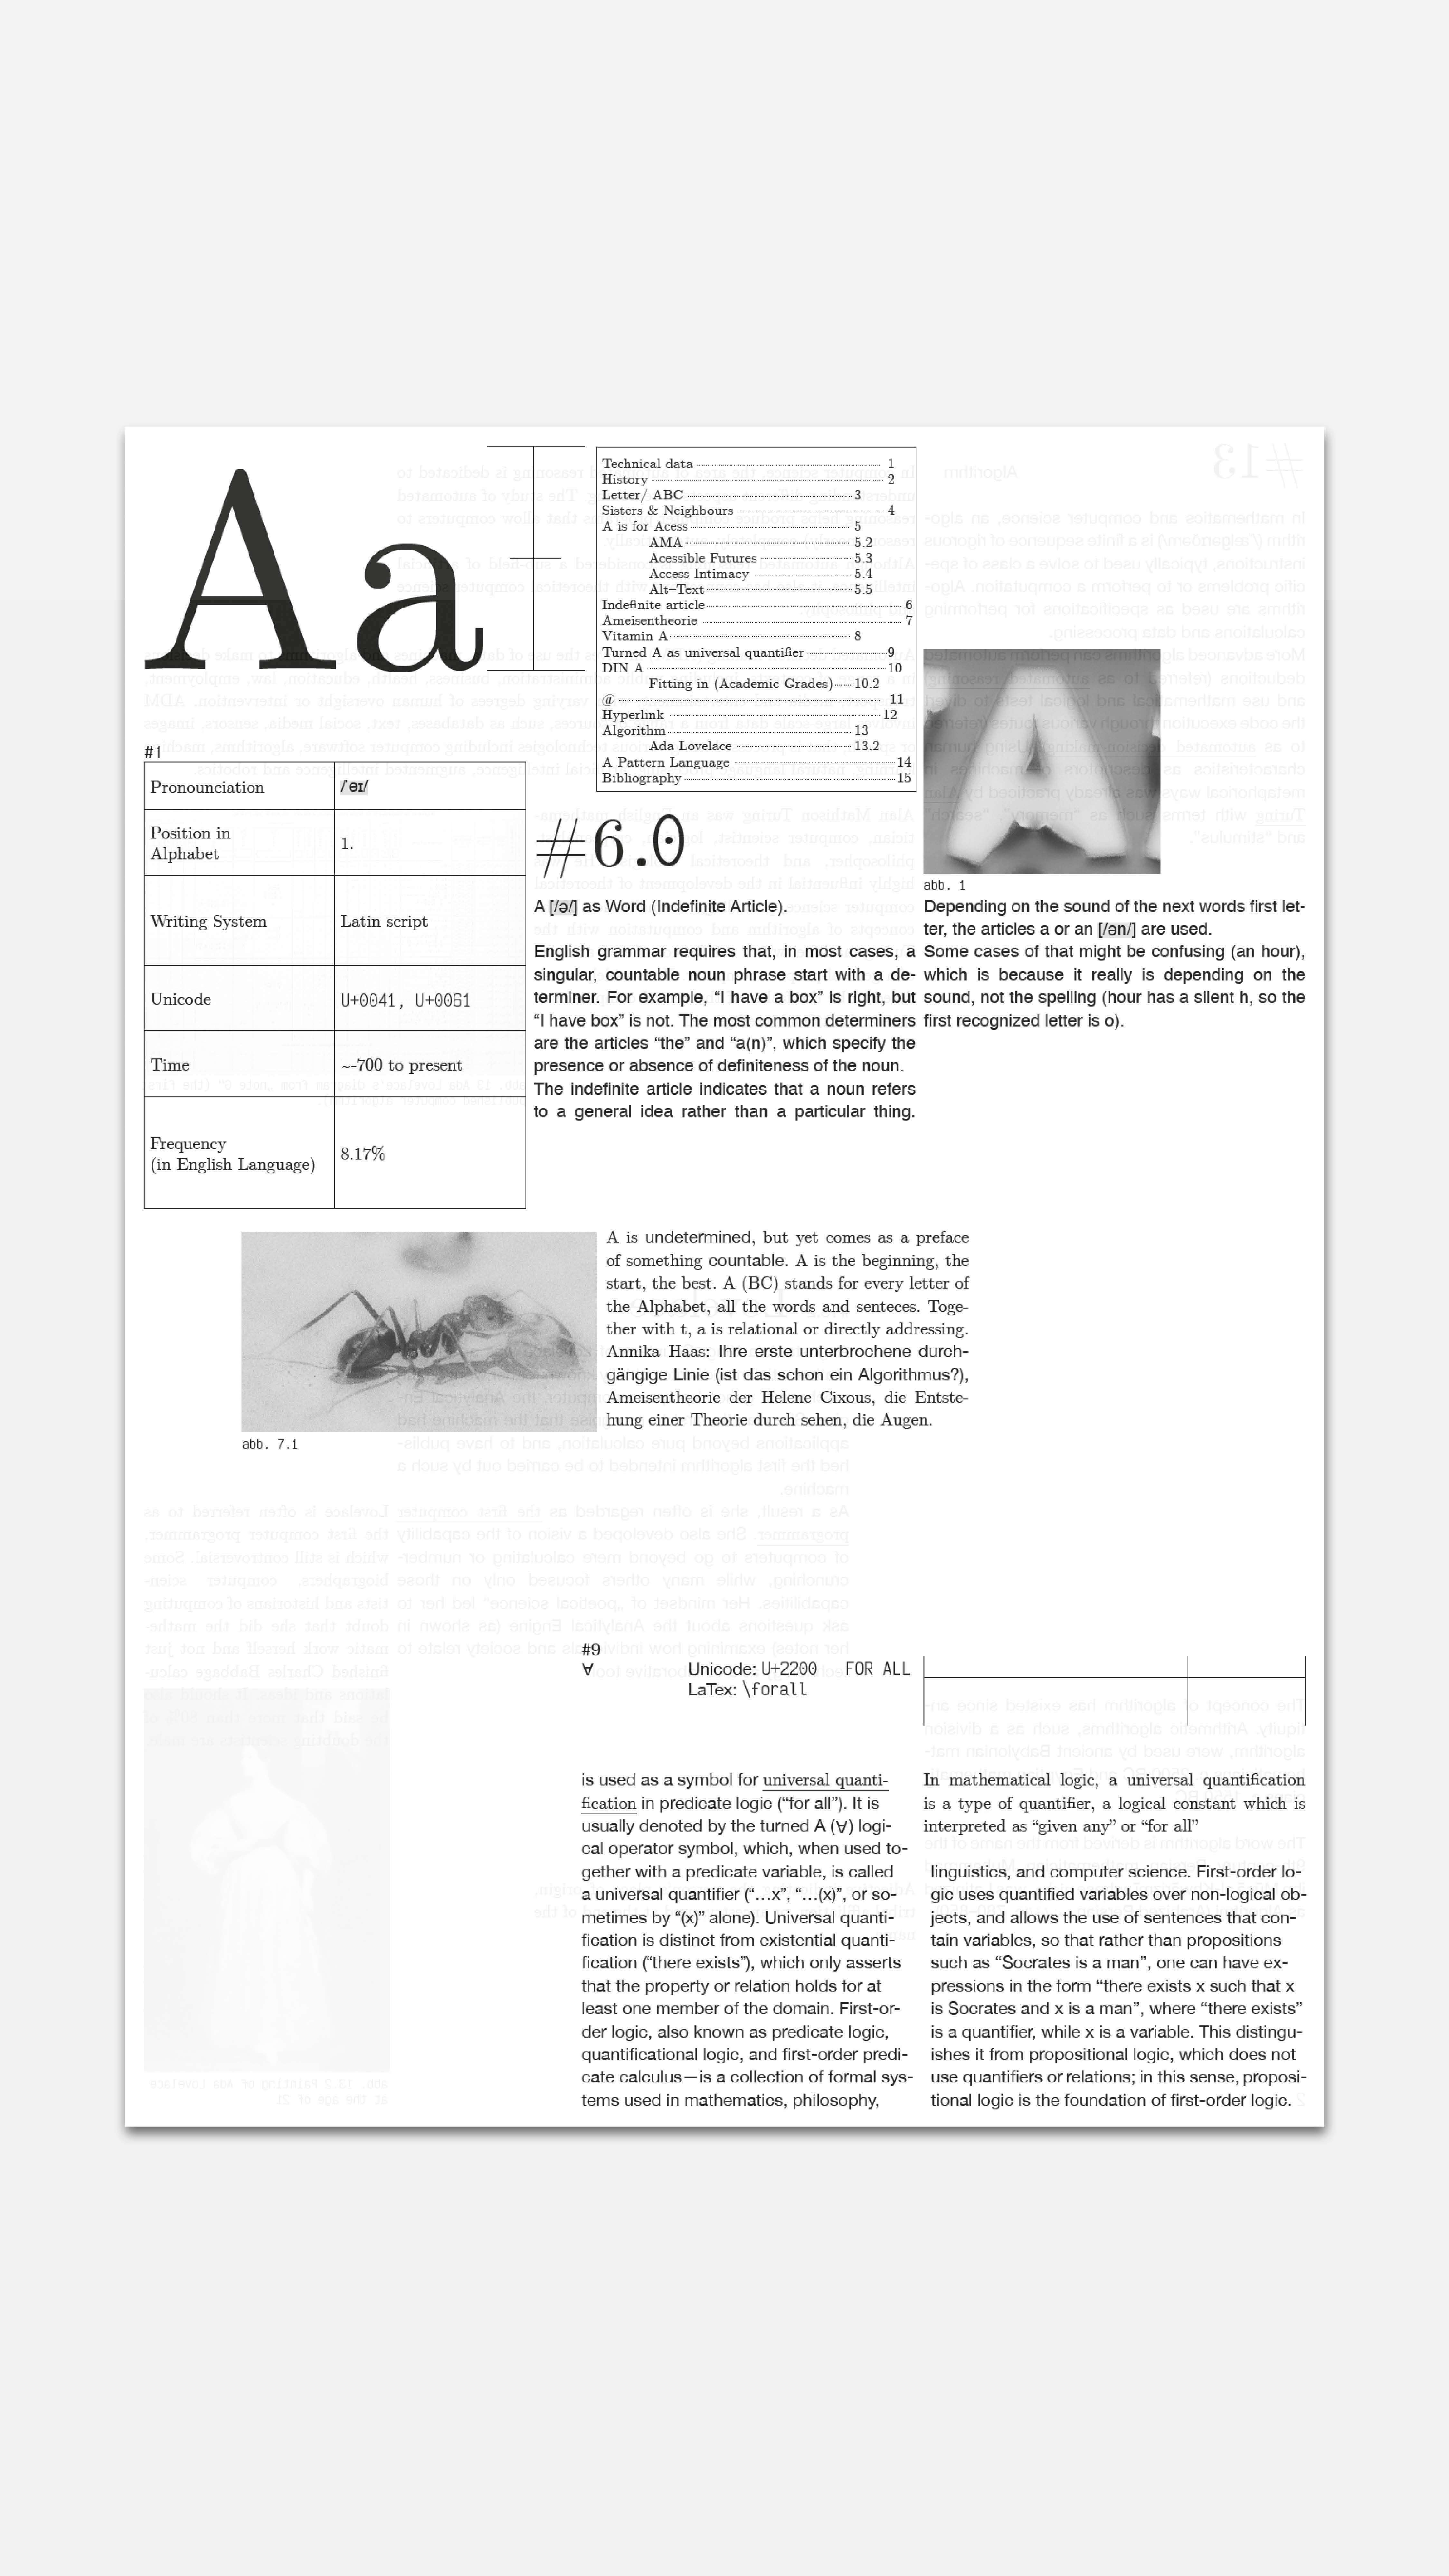 Cover of a cheaply printed publication, showing thoughtful aligned text and image blocks.